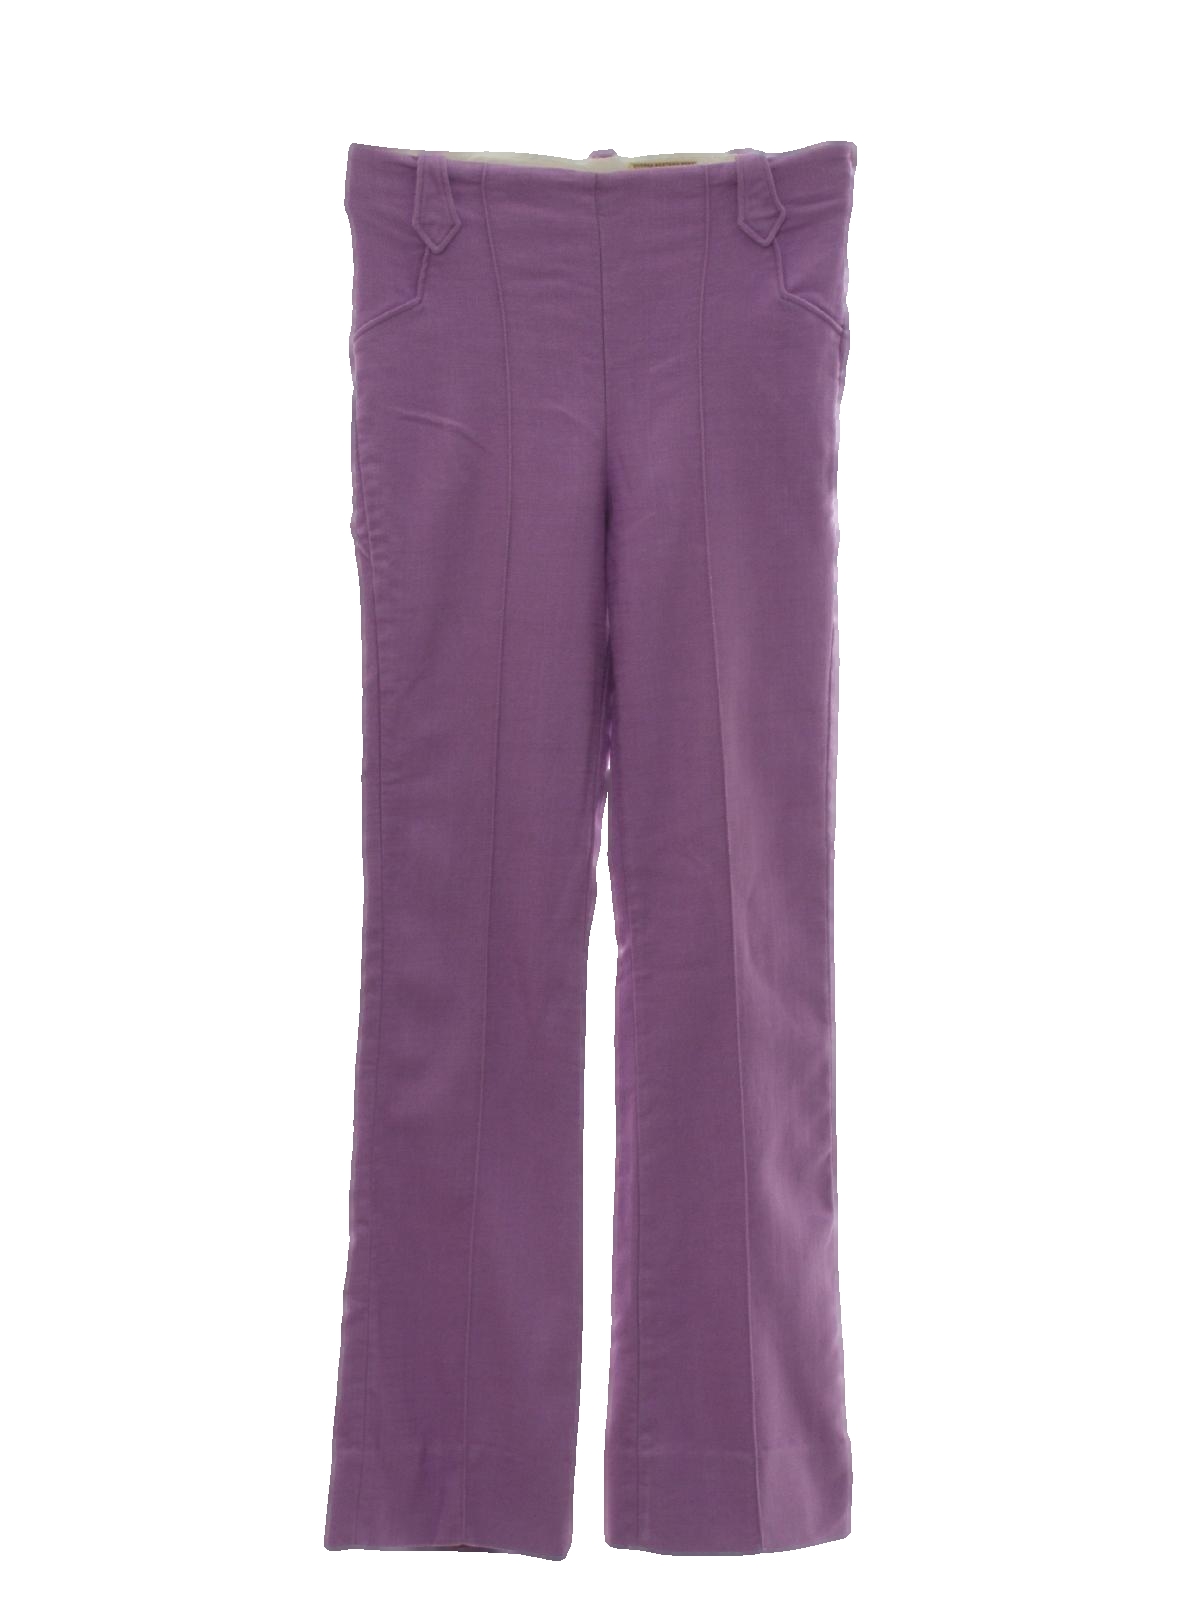 1960's Retro Flared Pants / Flares: 60s -Lasso- Womens or girls orchid ...